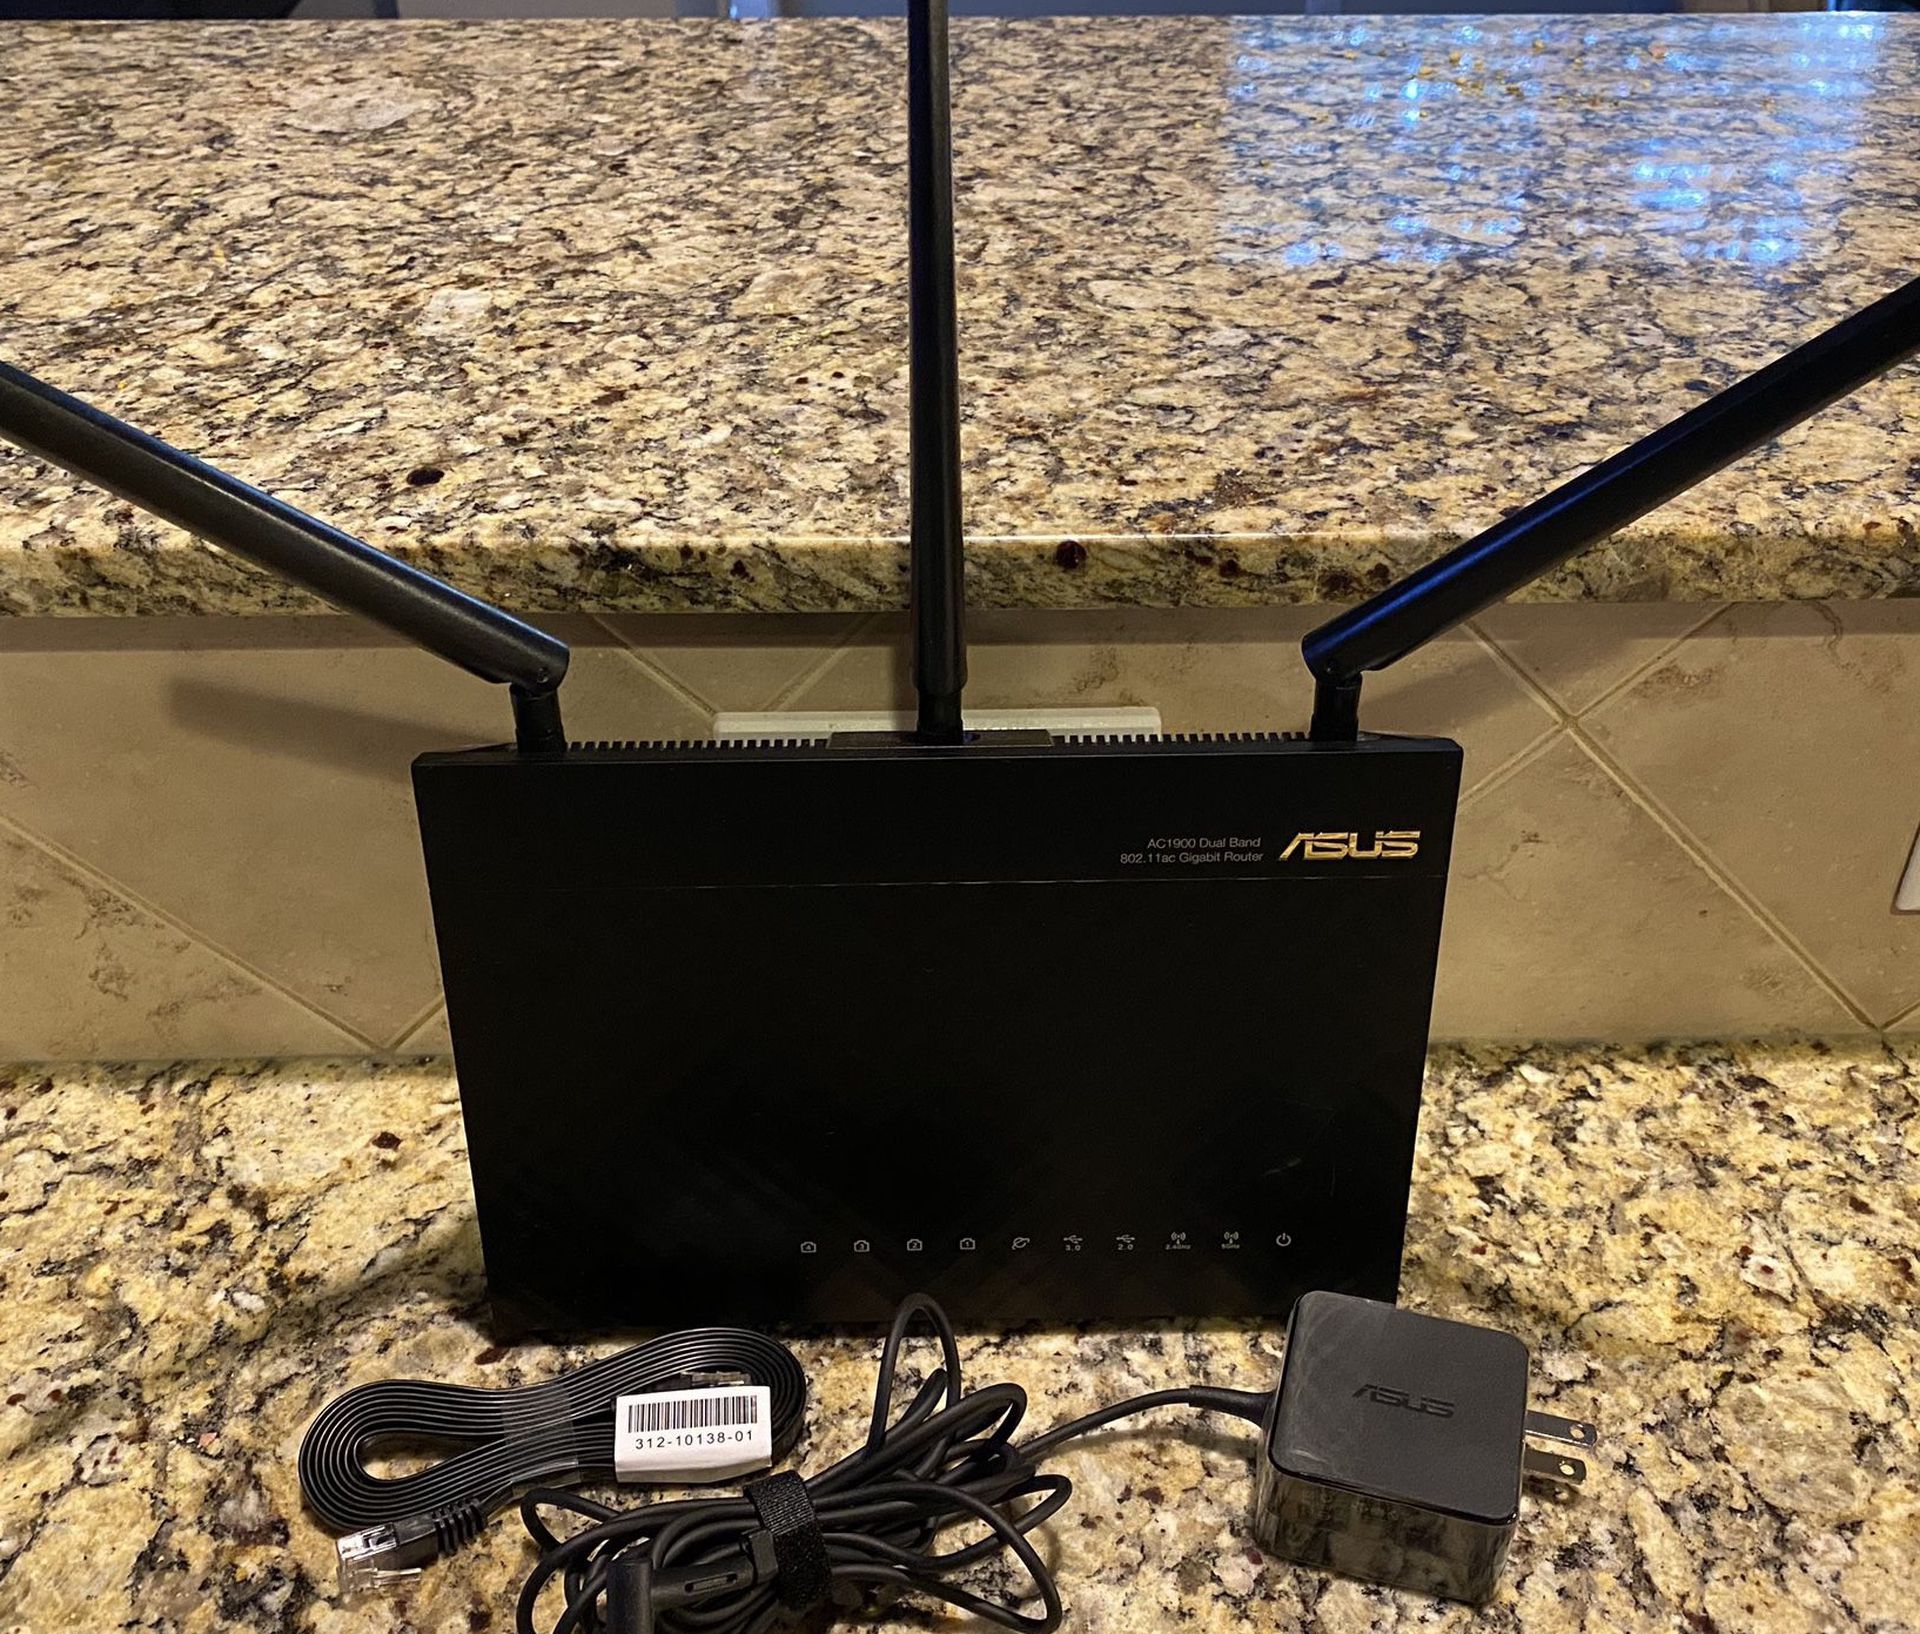 ASUS AC1900 dual band router